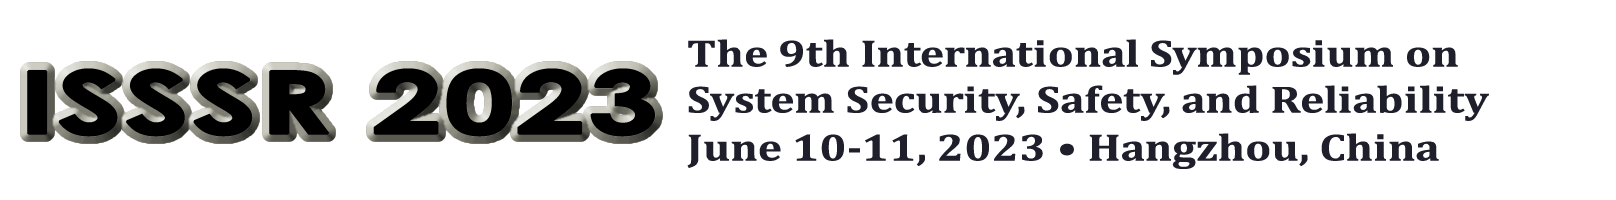 ISSSR 2023 May 27-28, 2023 in Hangzhou, China. The 9th International Symposium on System and Software Reliability.